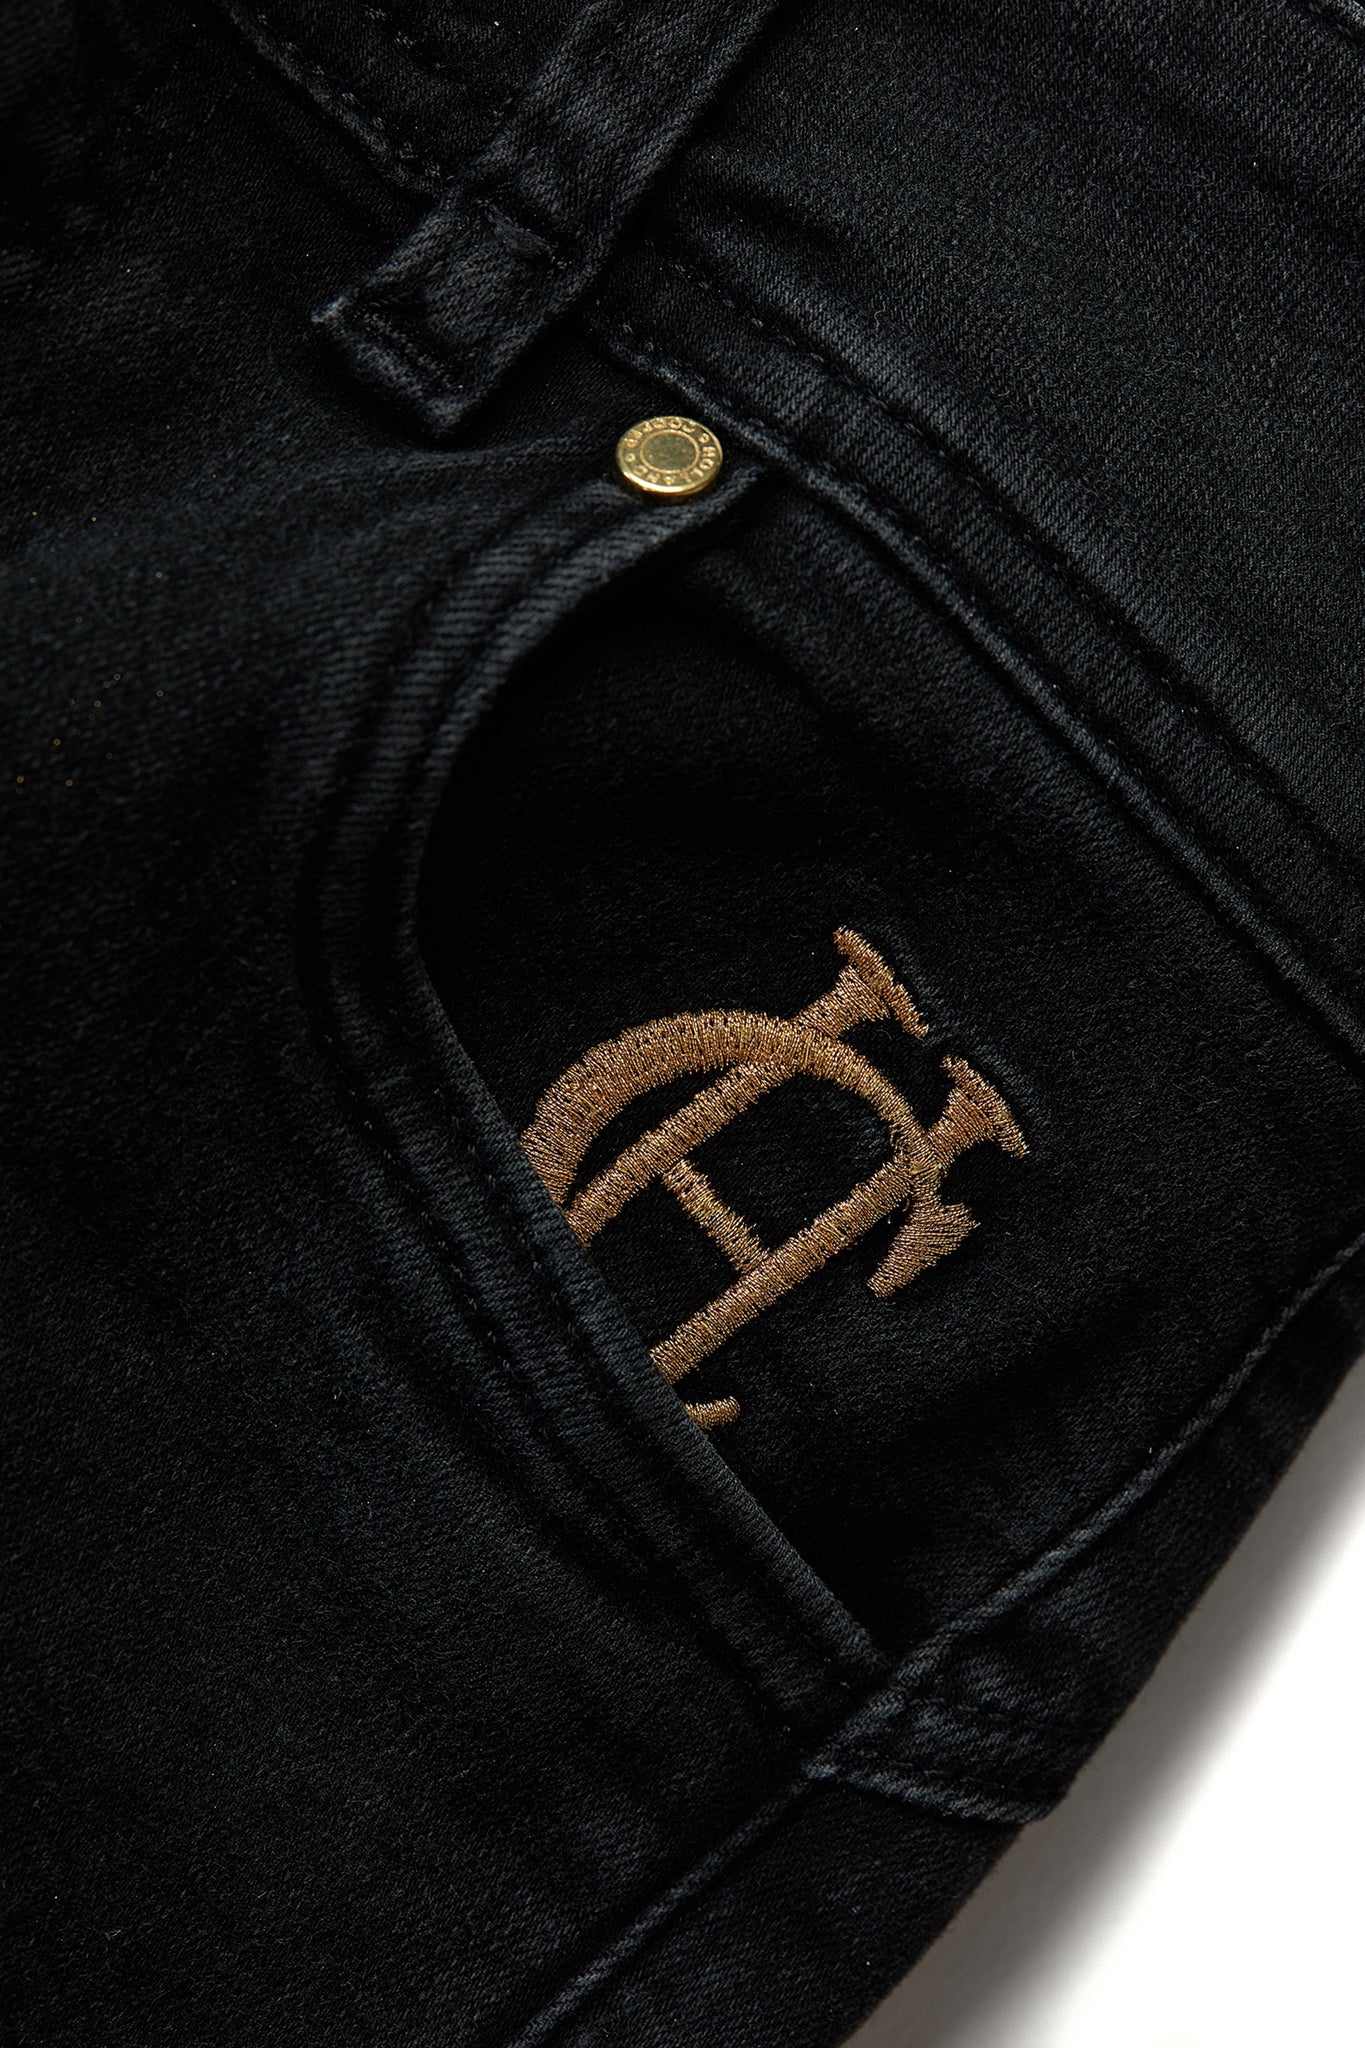 hc embroidery detail on front left pocket on womens high rise washed black denim skinny stretch jean with jodhpur style seam and two open pockets to the front